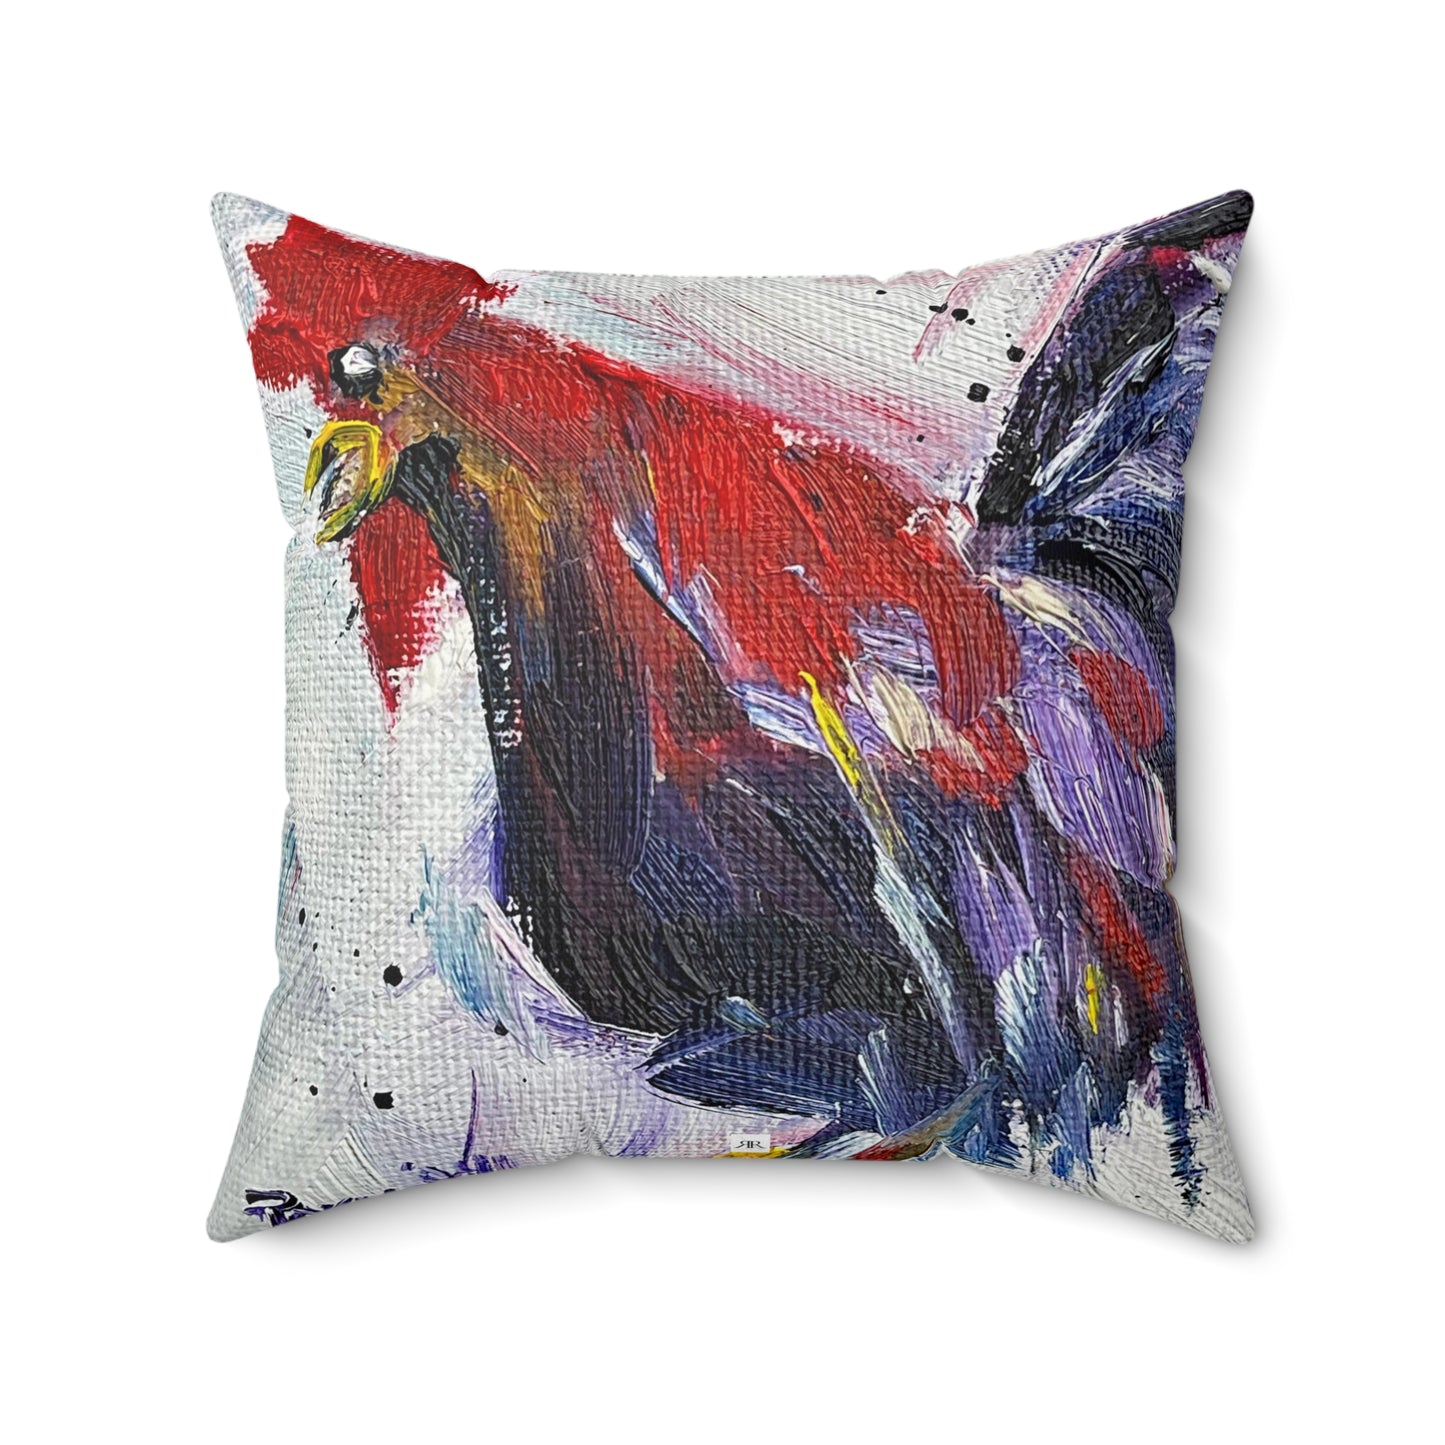 As the Rooster Crows Indoor Spun Polyester Square Pillow